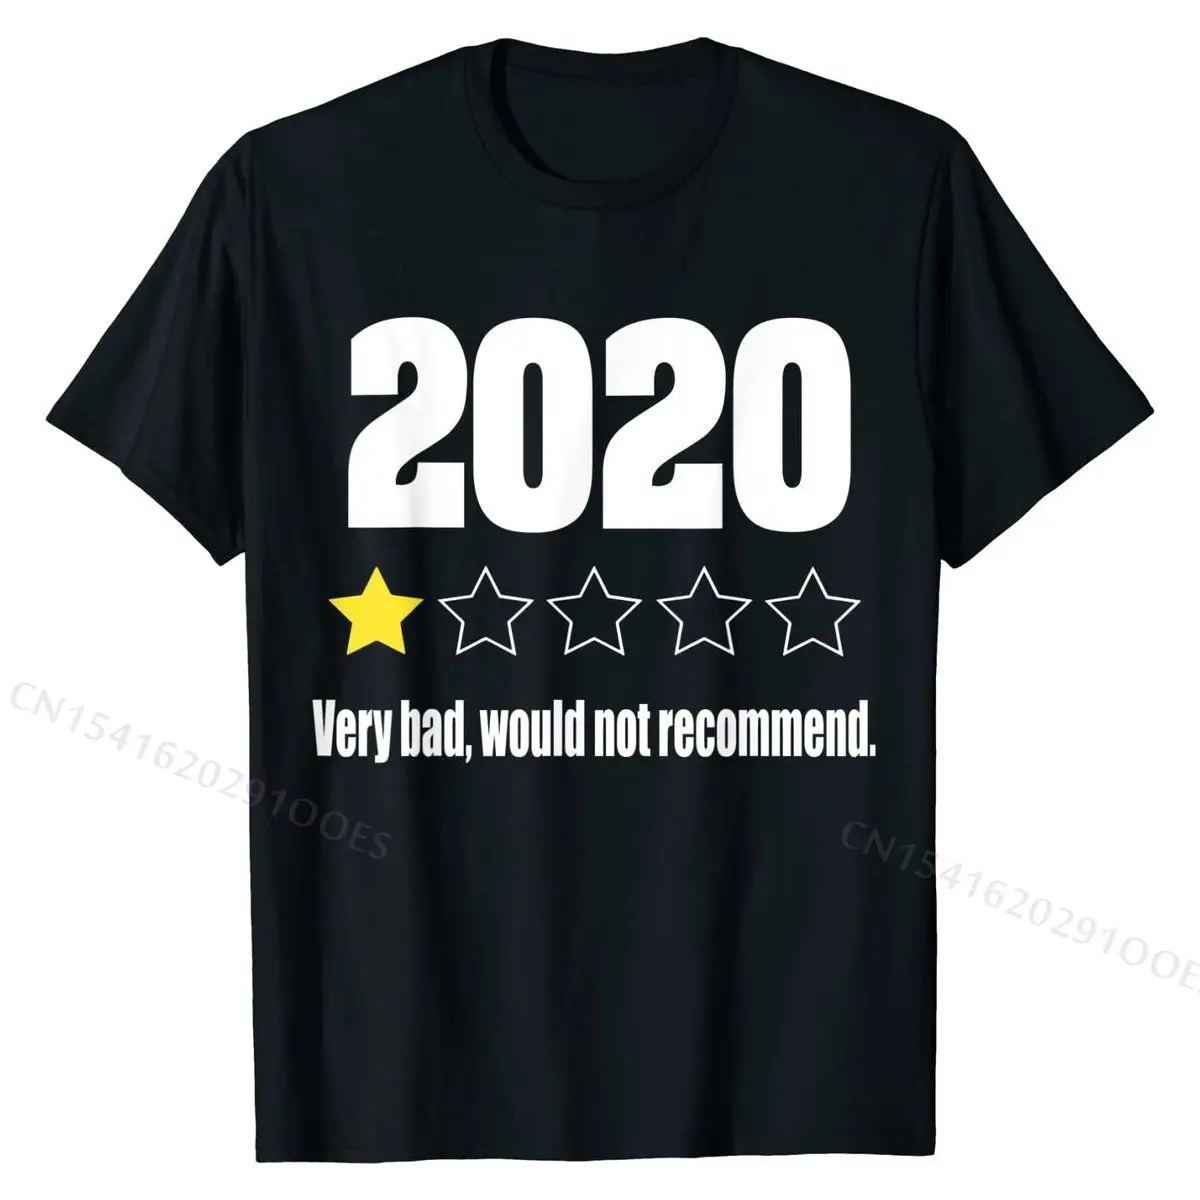 

2020 Review - Very Bad Would Not Recommend - 1 Star Rating T-Shirt Design Tops Tees for Men Cotton Tshirts Design New